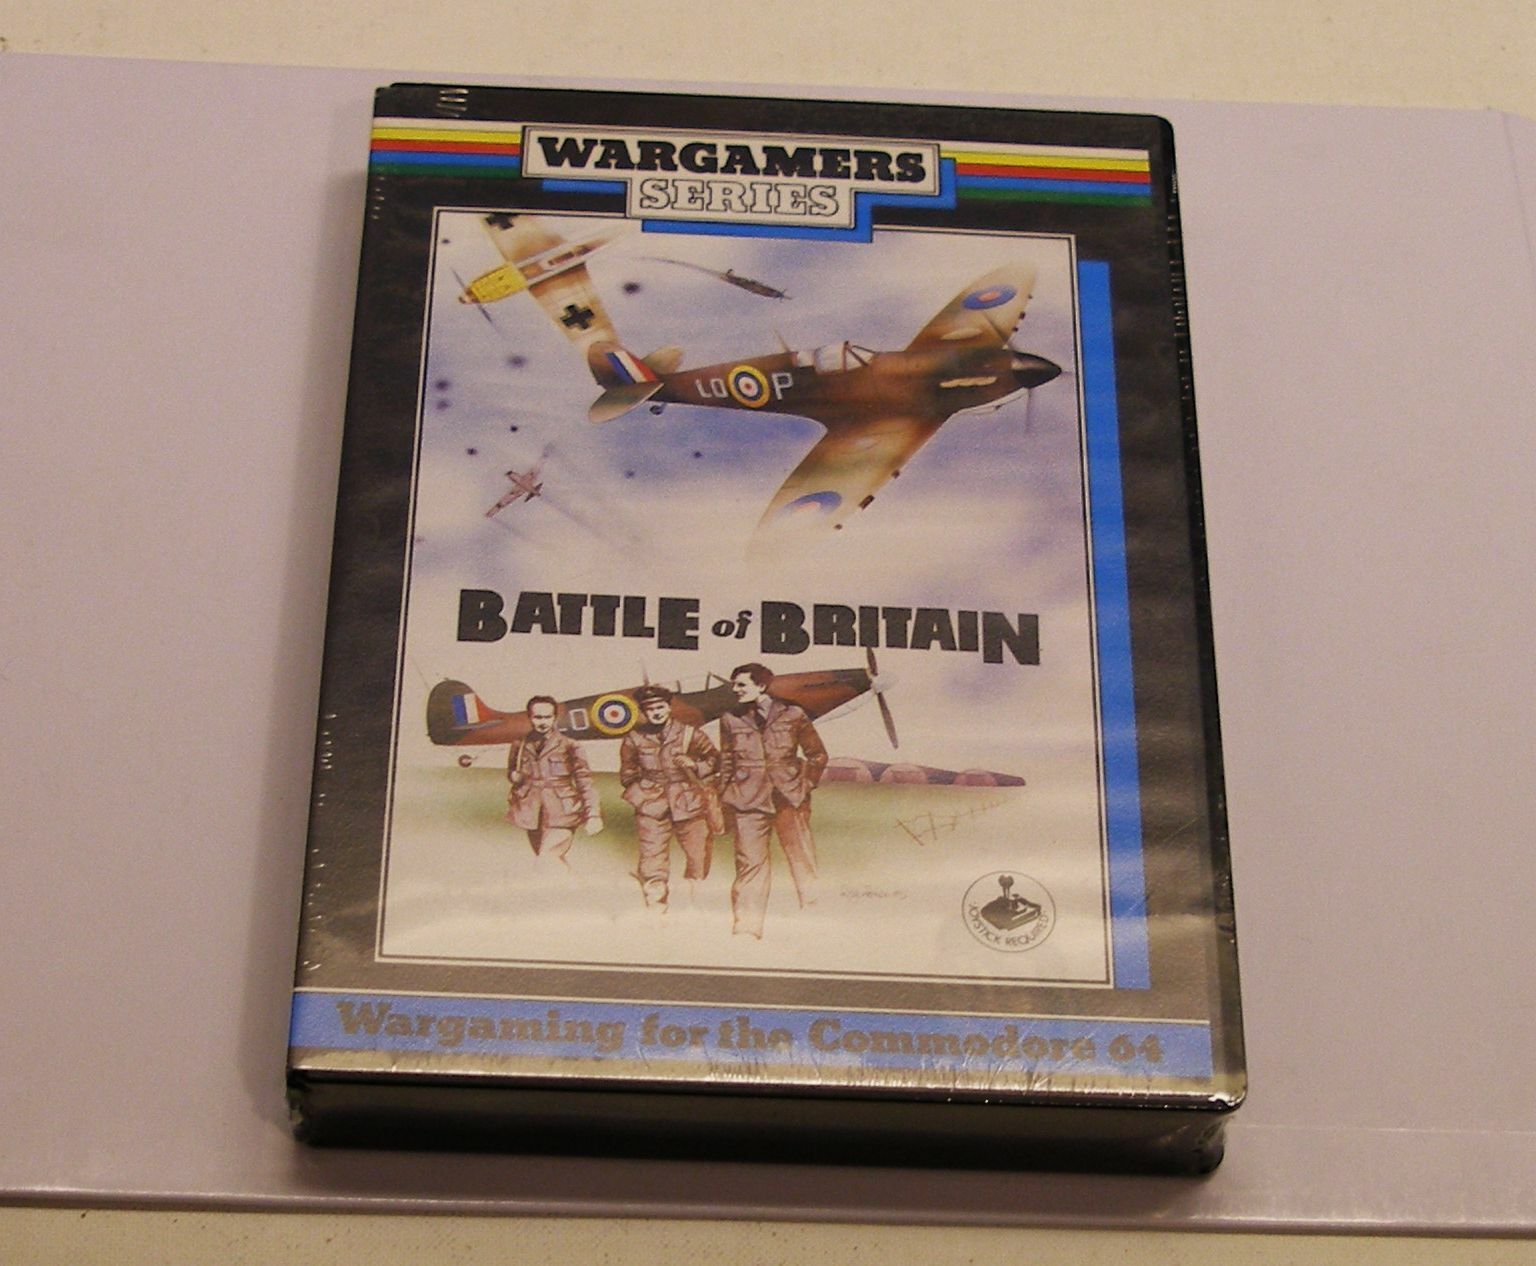 The Battle of Britain by Personal Software Services for Commodore 64/128 - NEW